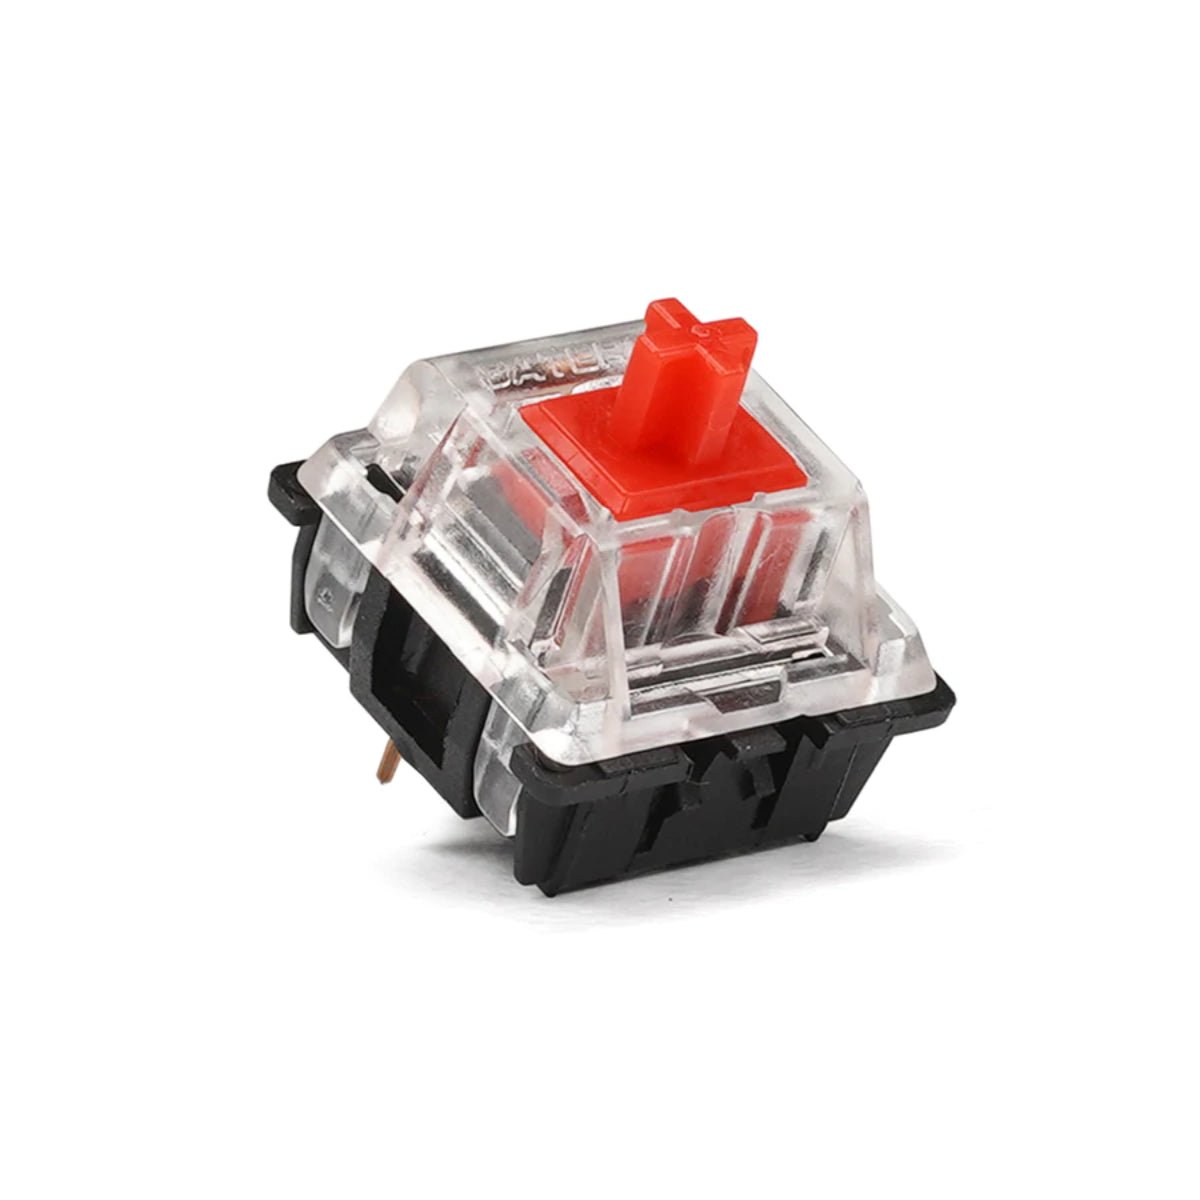 KBD Fans Gateron Linear Switches 3 Pin - Red - Store 974 | ستور ٩٧٤